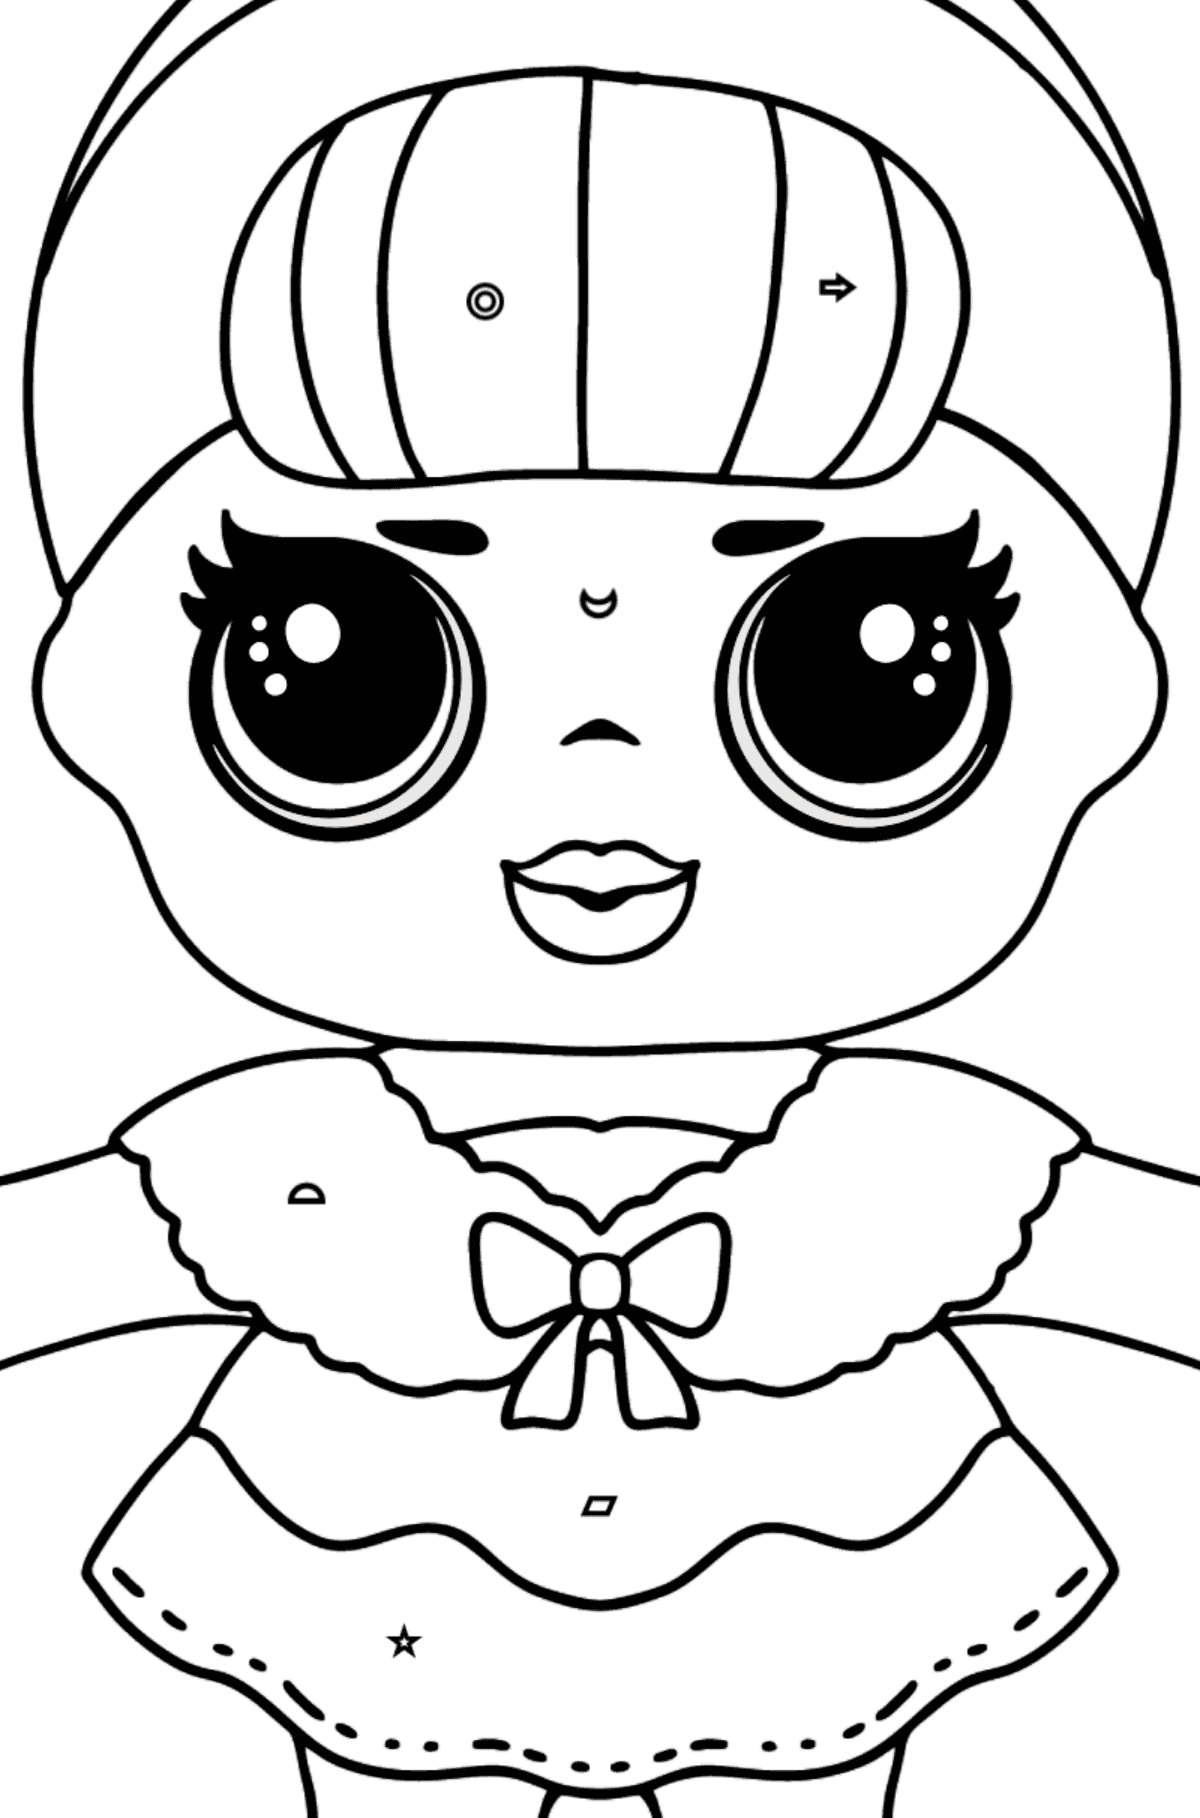 LOL Surprise Doll Crystal Queen - Coloring by Geometric Shapes for Kids